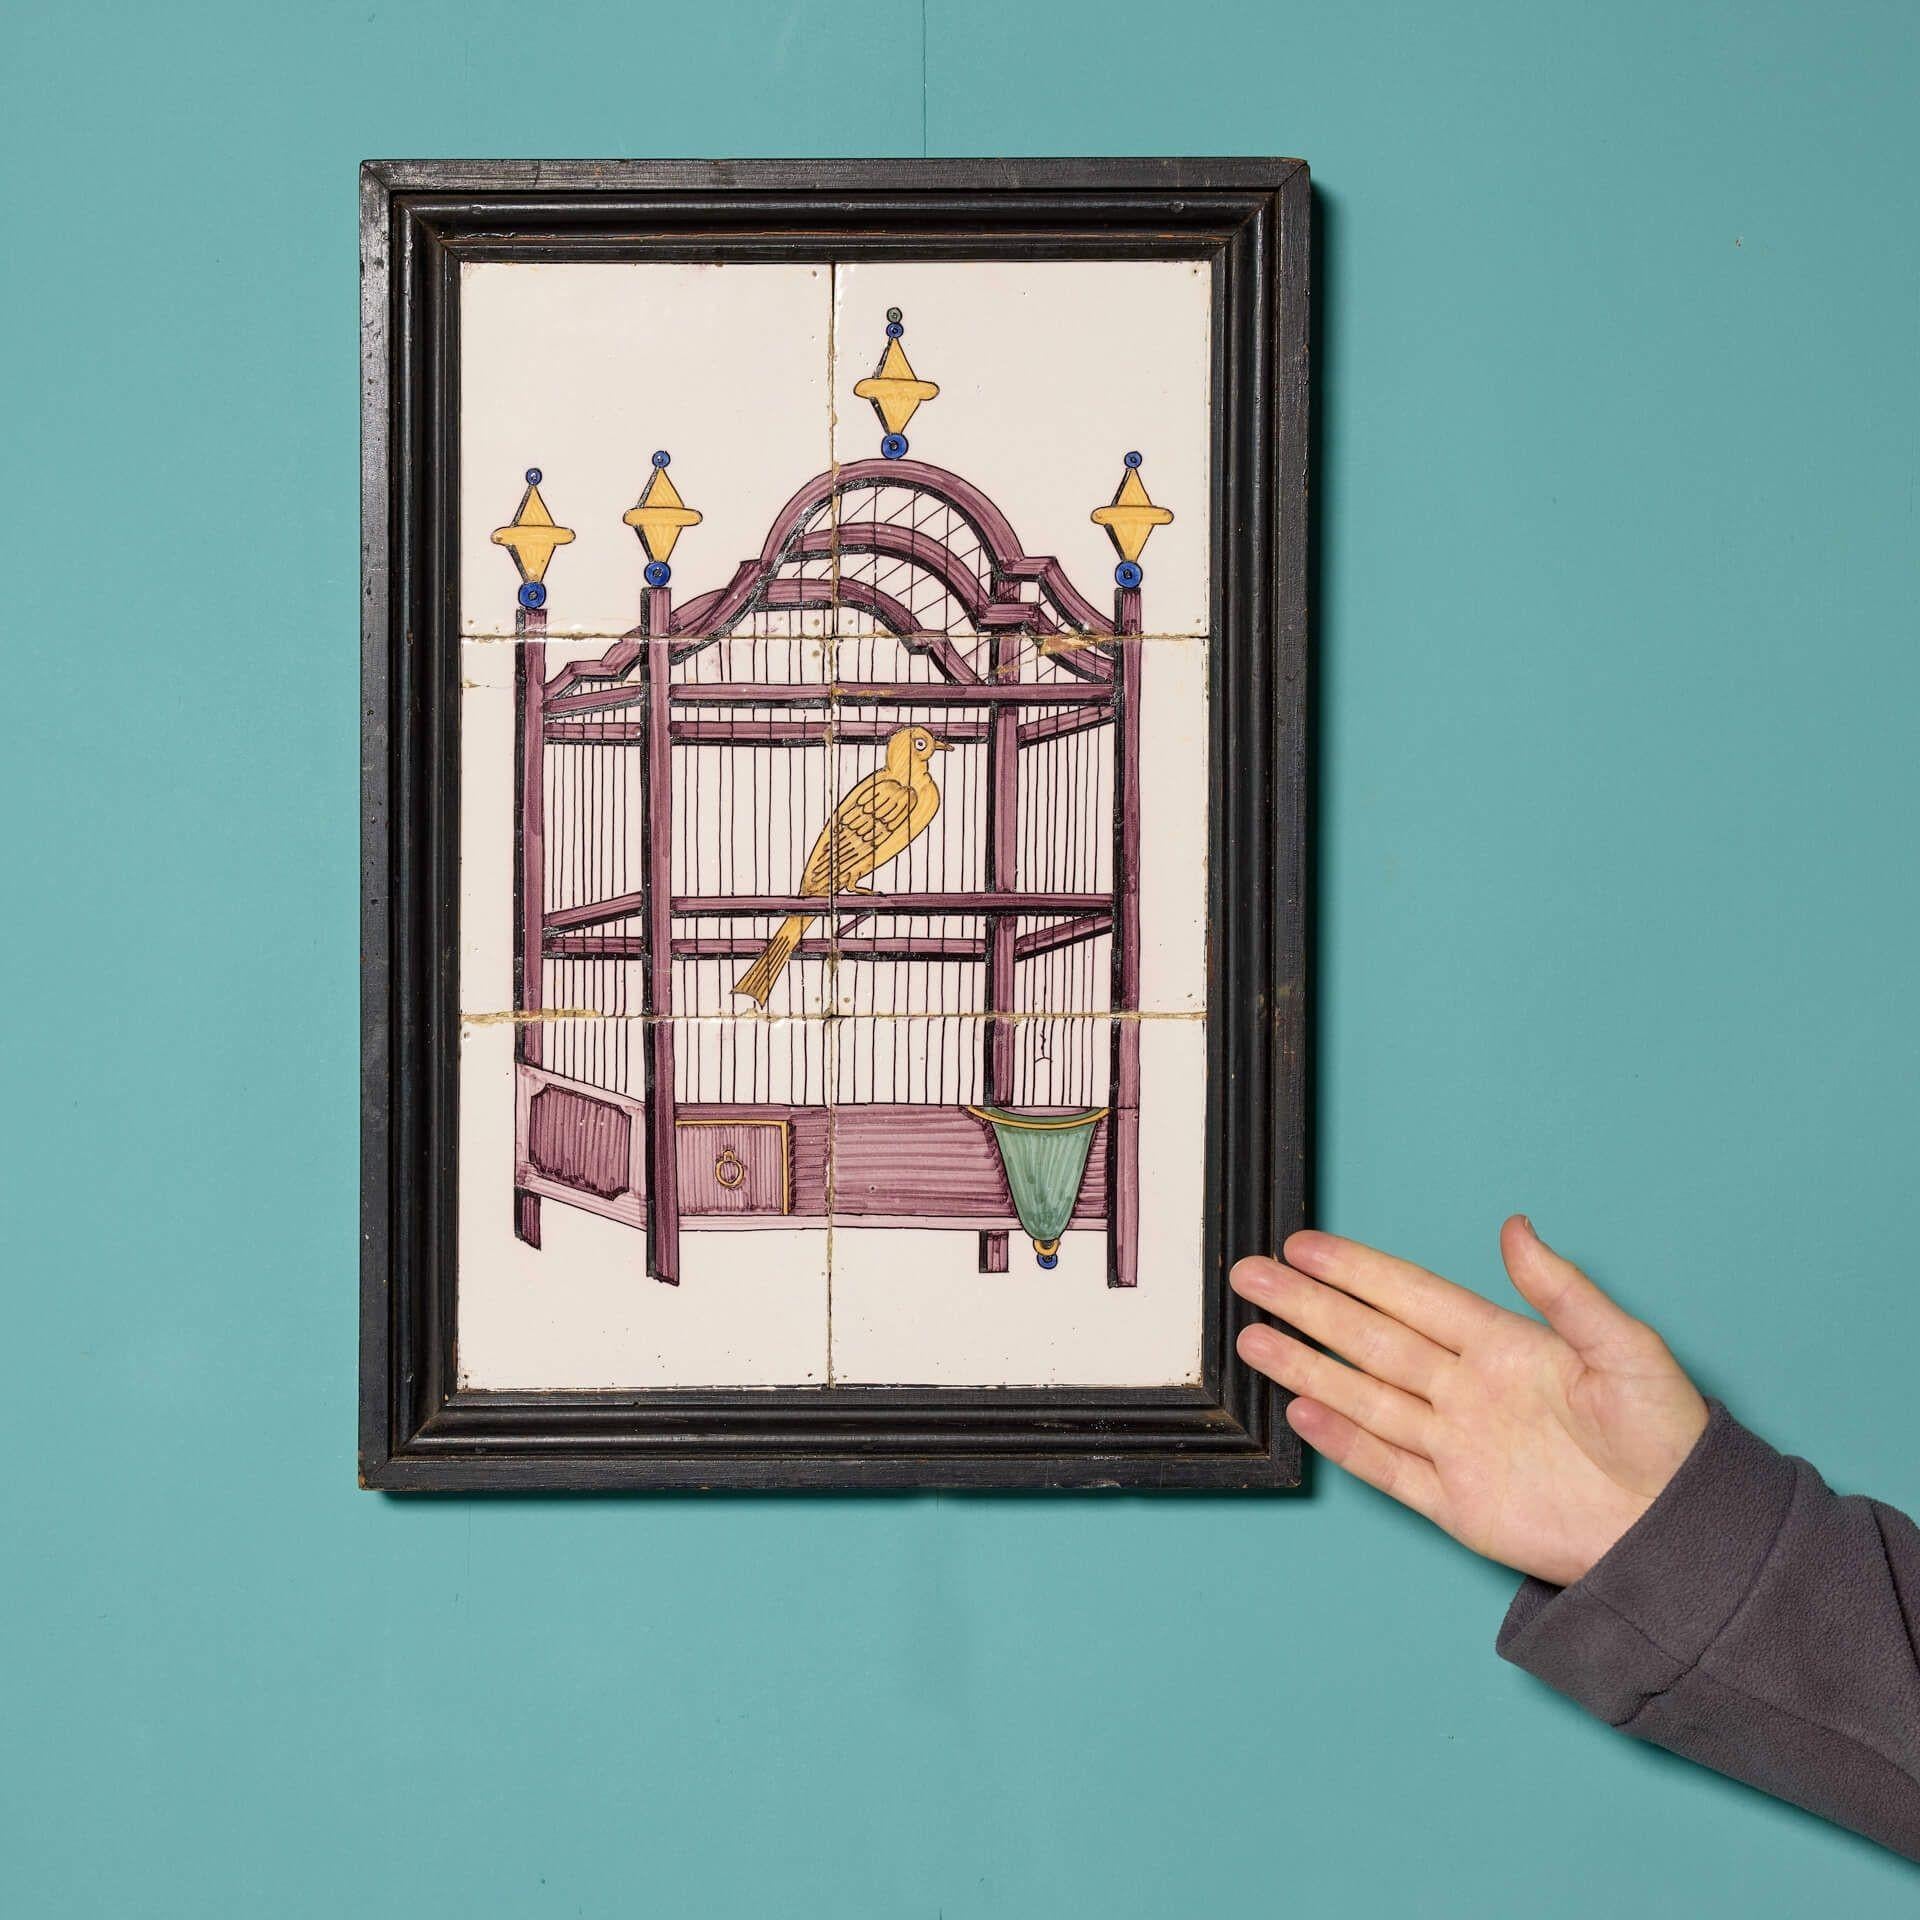 This antique framed tile panel depicting a bird in a decorative cage, sourced from the estate of Dame Barbara Mary Quant, is quite the find. Displayed in a frame, the tiles make a beautiful artwork piece, looking wonderful hung on the wall of period